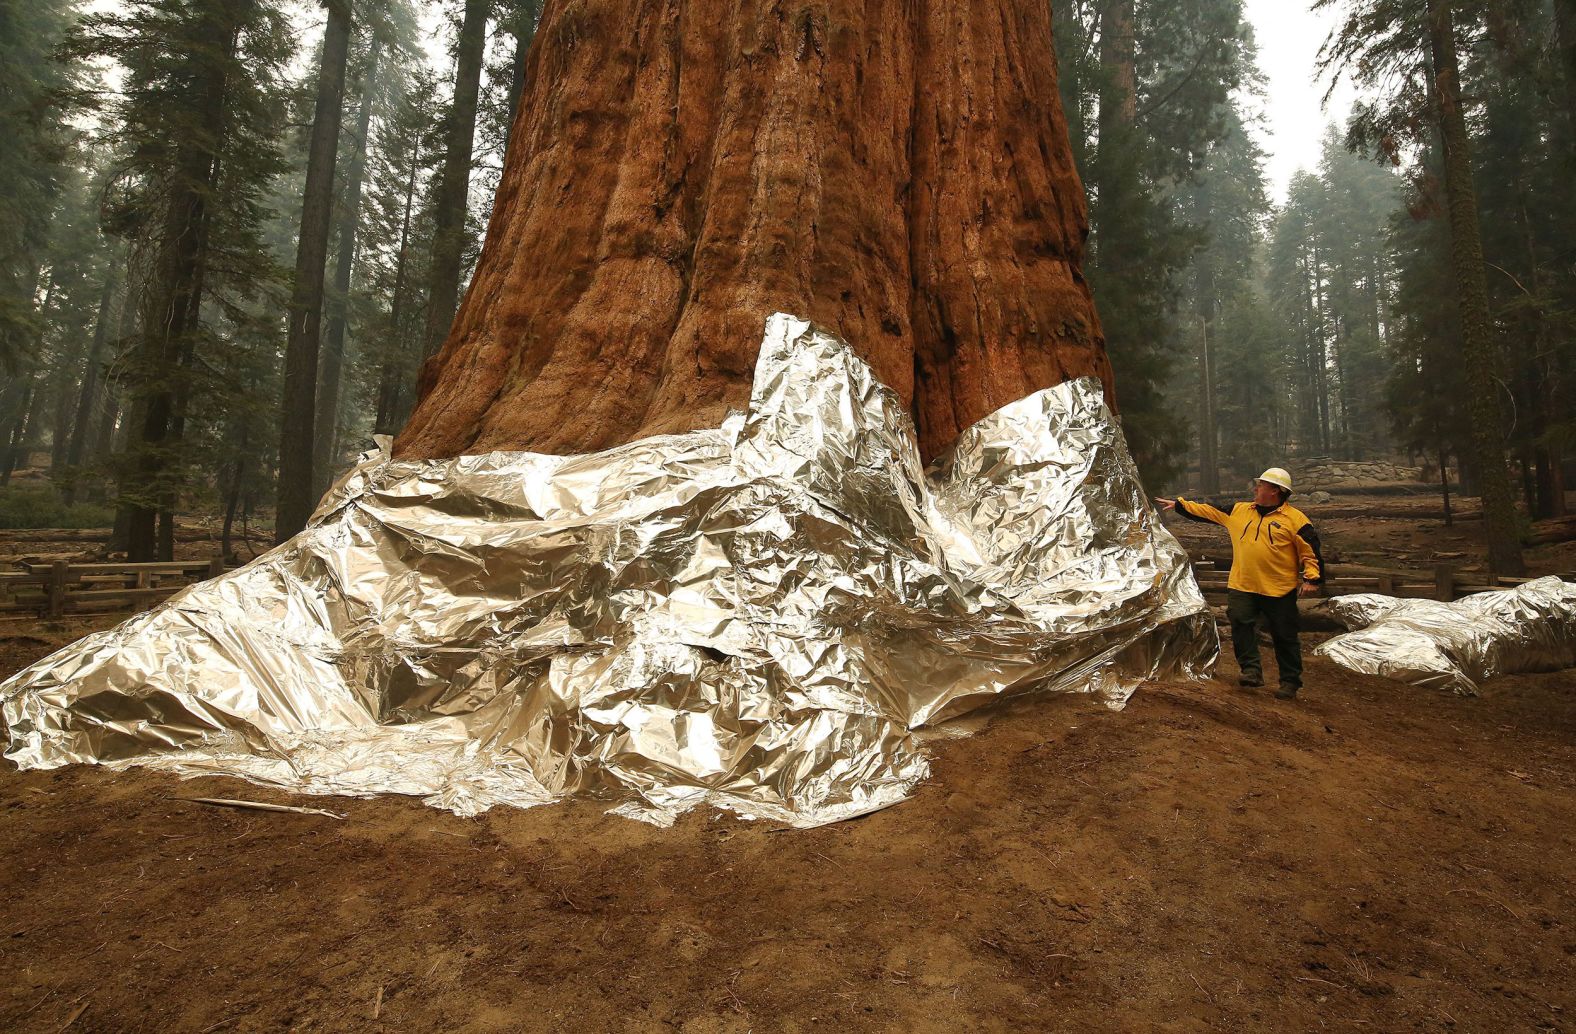 Operations Section Chief Jon Wallace looks at the General Sherman giant sequoia tree at Sequoia National Park on September 22. The base of the tree, the world's largest by volume, was <a href="index.php?page=&url=https%3A%2F%2Fwww.cnn.com%2F2021%2F09%2F22%2Fweather%2Fus-western-wildfires-wednesday%2Findex.html" target="_blank">wrapped in an aluminum-based burn-resistant material</a> to protect it from wildfires.